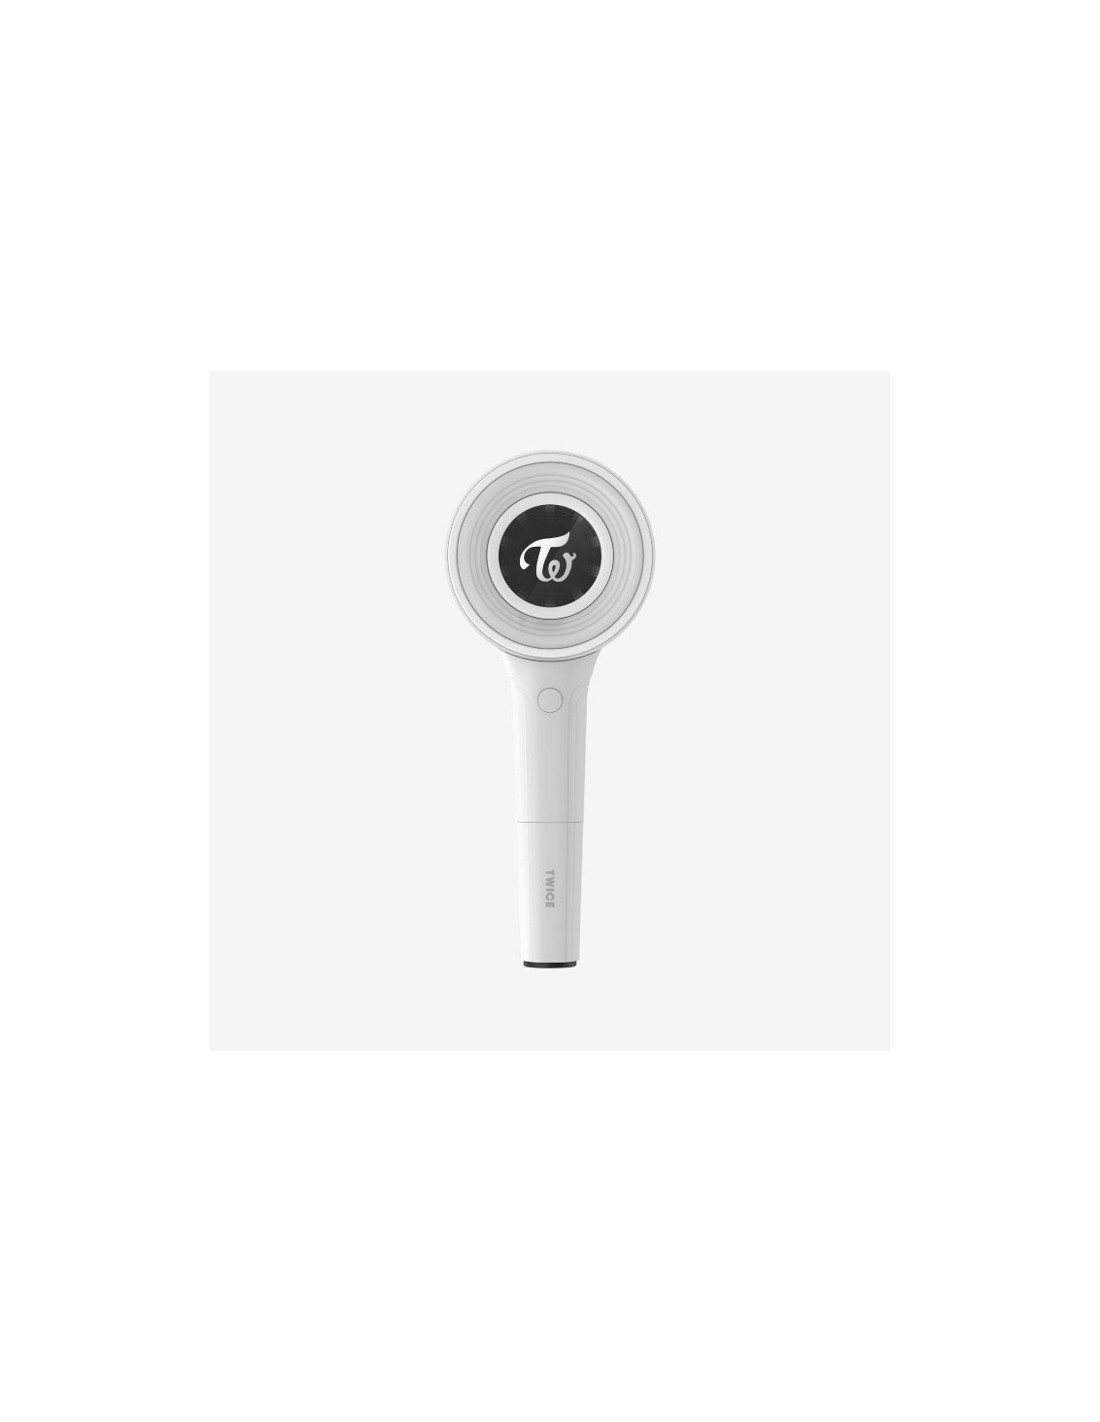 TWICE Official Light Stick - CANDYBONG ∞